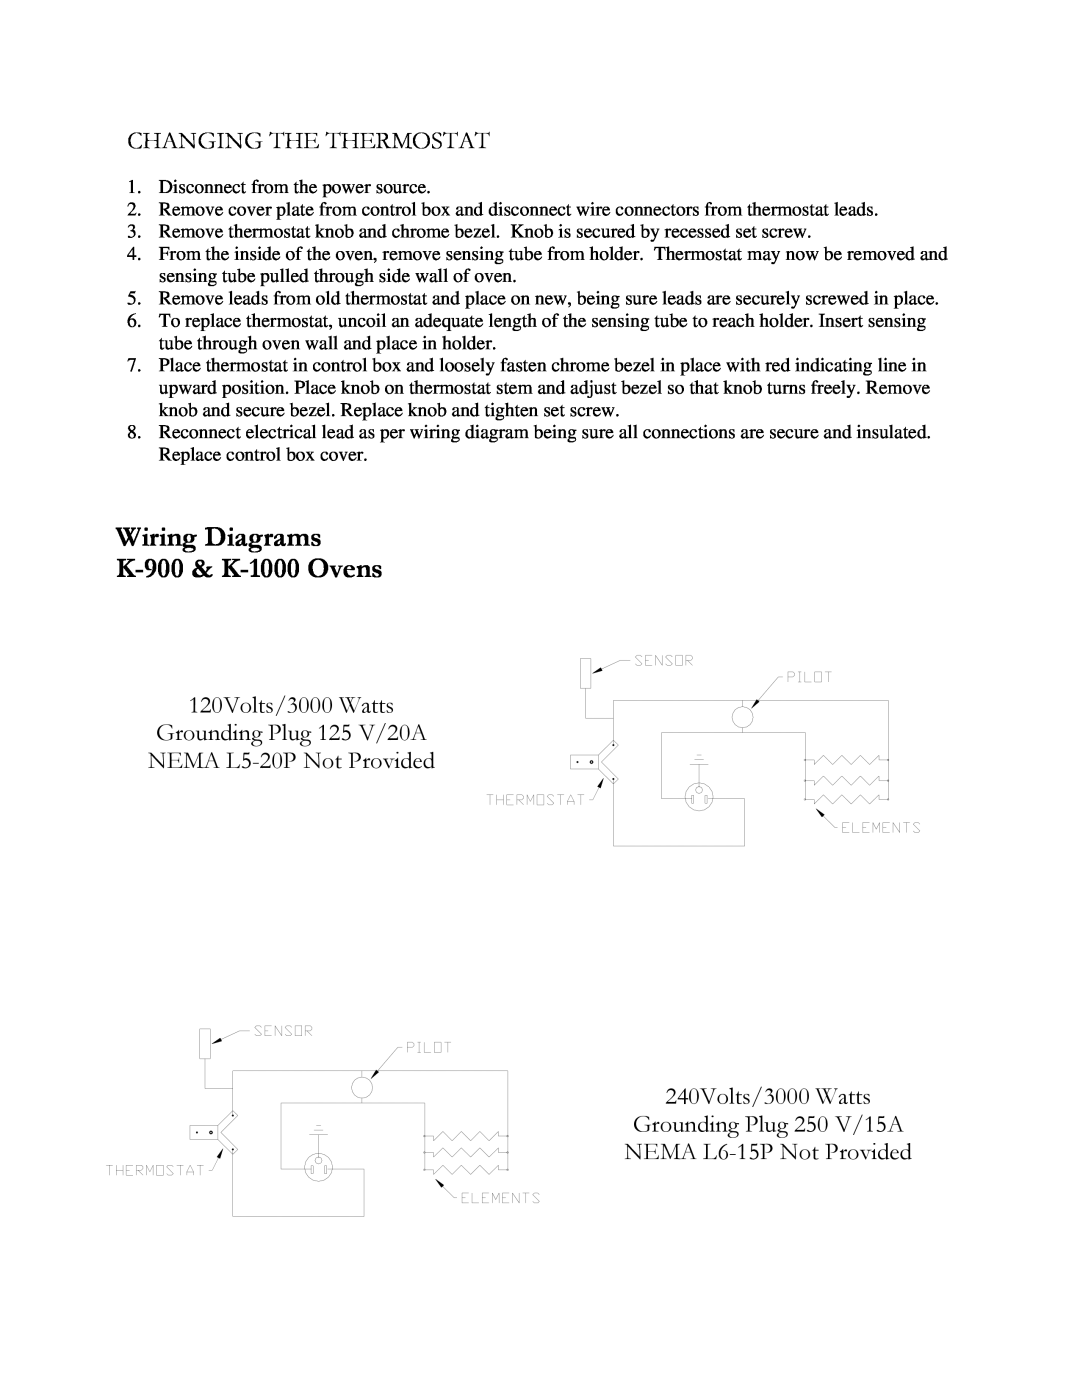 Henkel manual Wiring Diagrams K-900& K-1000Ovens, Changing The Thermostat, 120Volts/3000 Watts, 240Volts/3000 Watts 